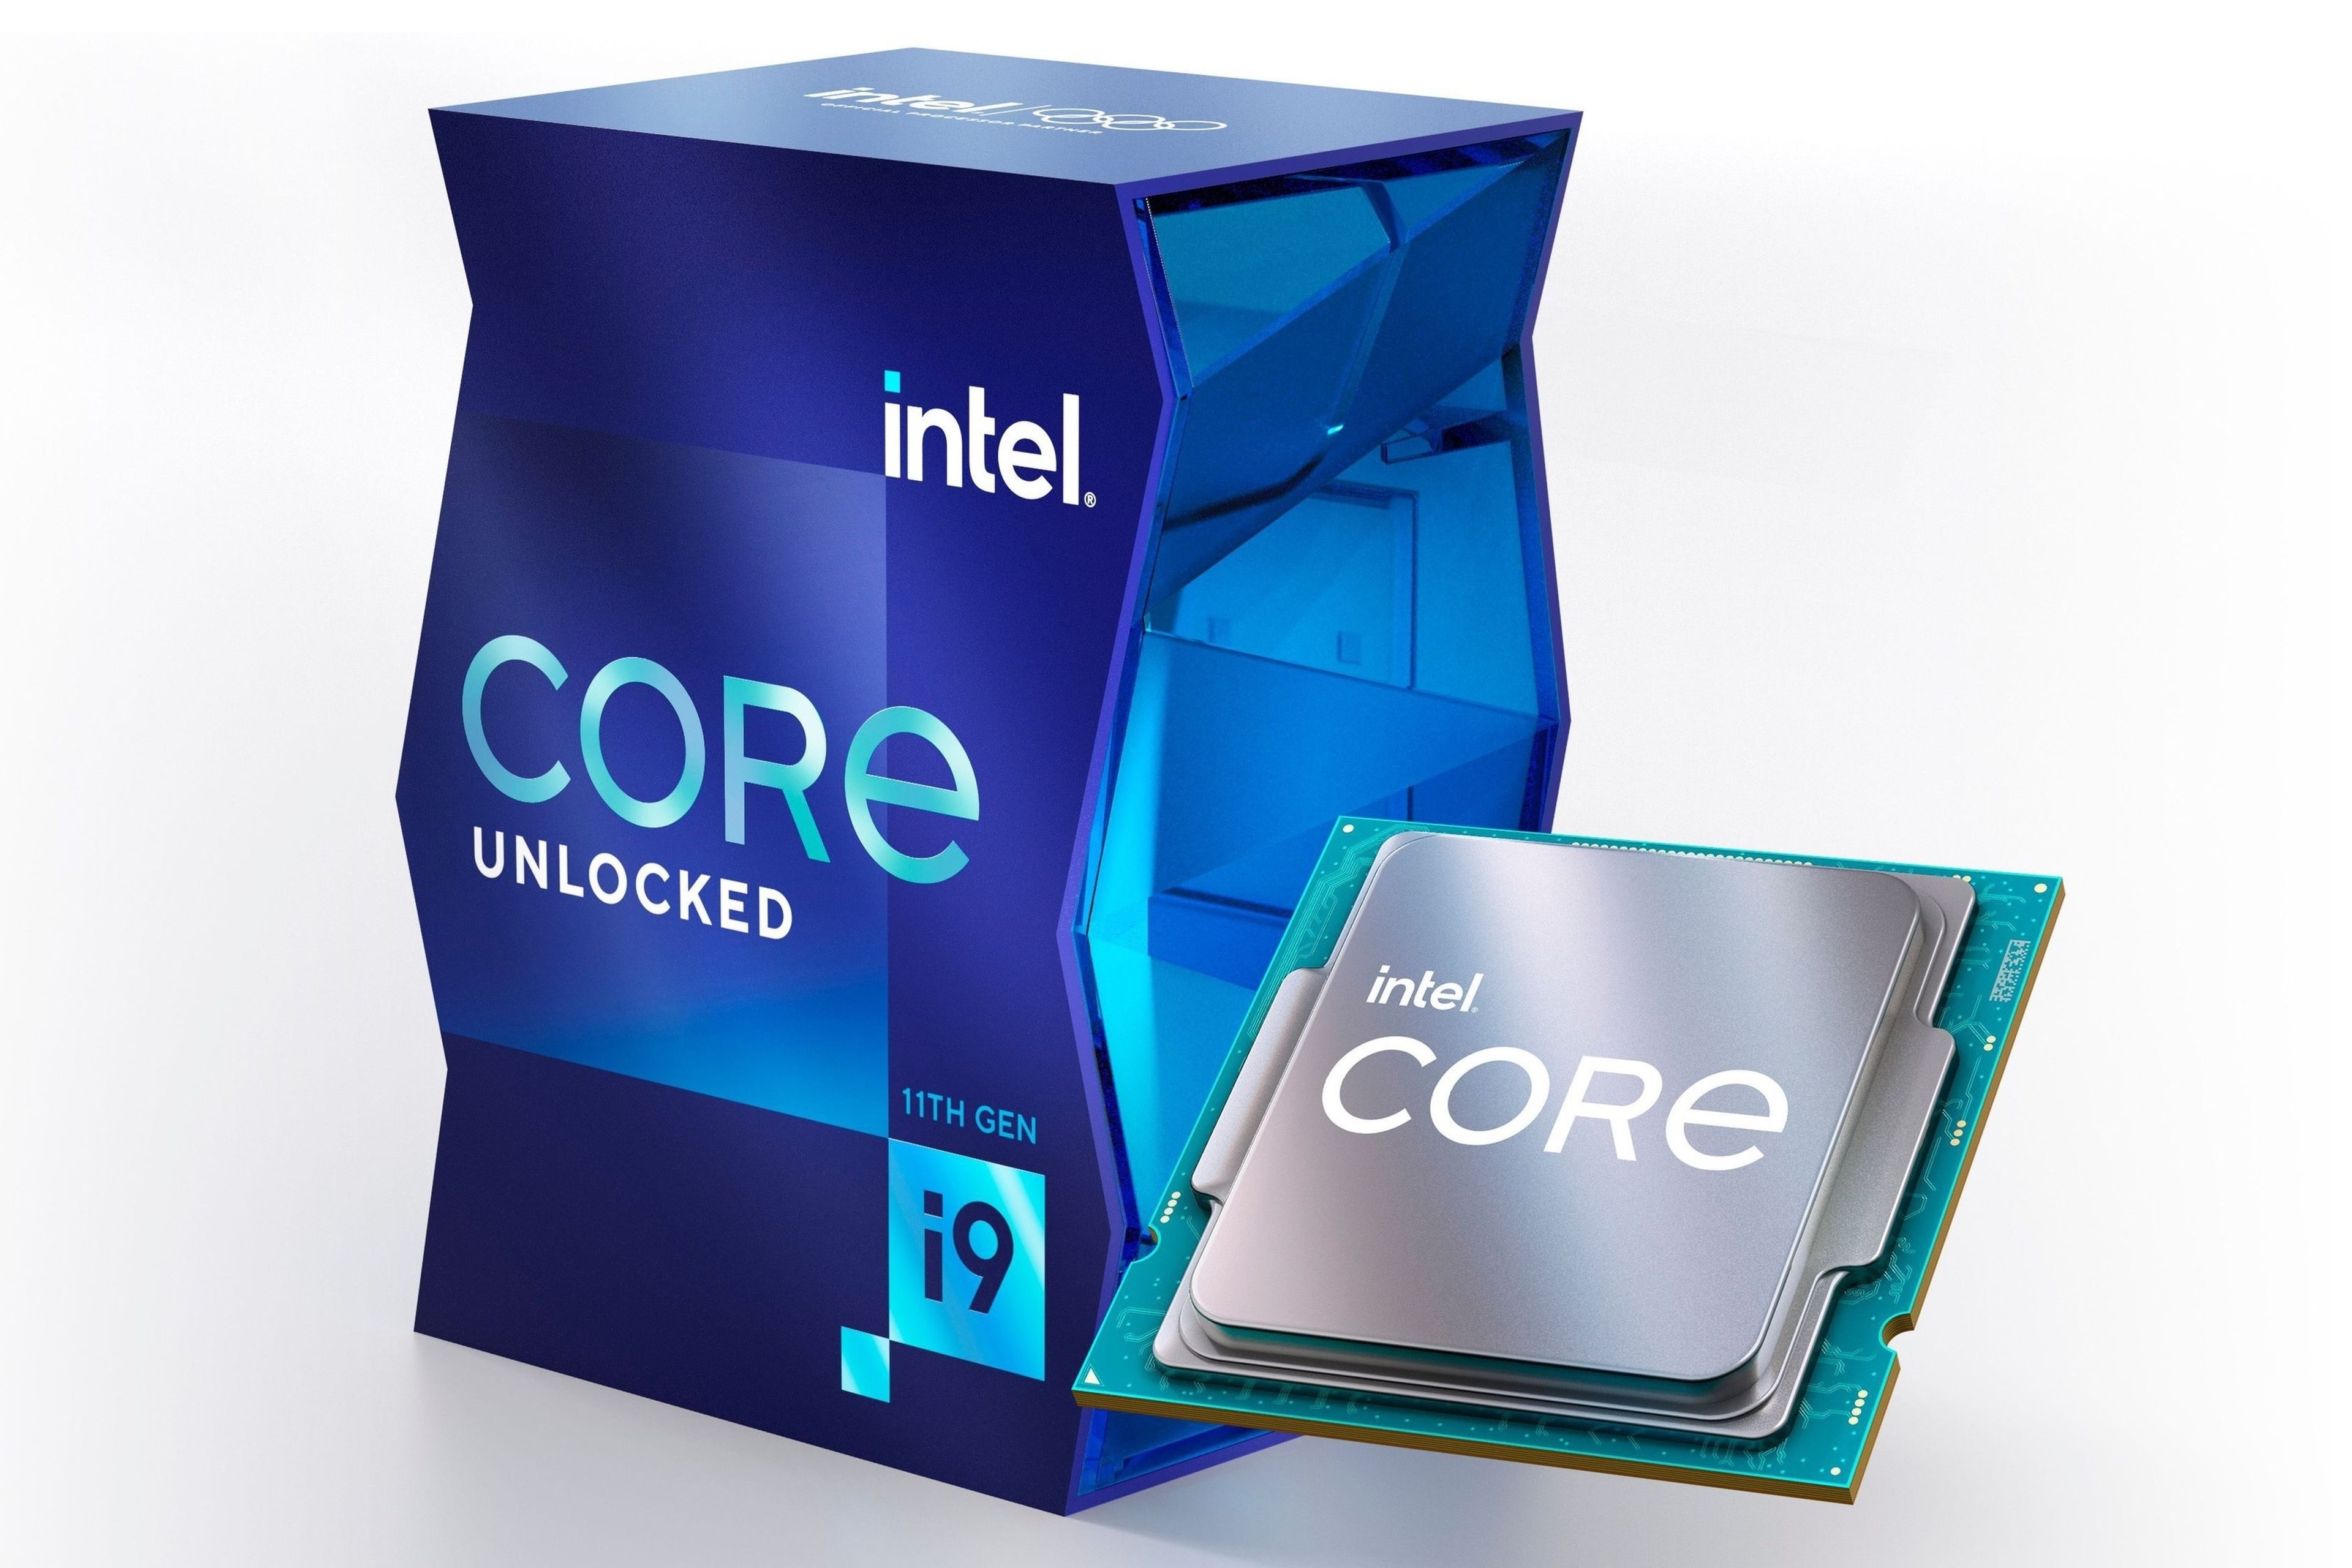 Intel Core i5-13400 Confirmed to Have Two Different Versions